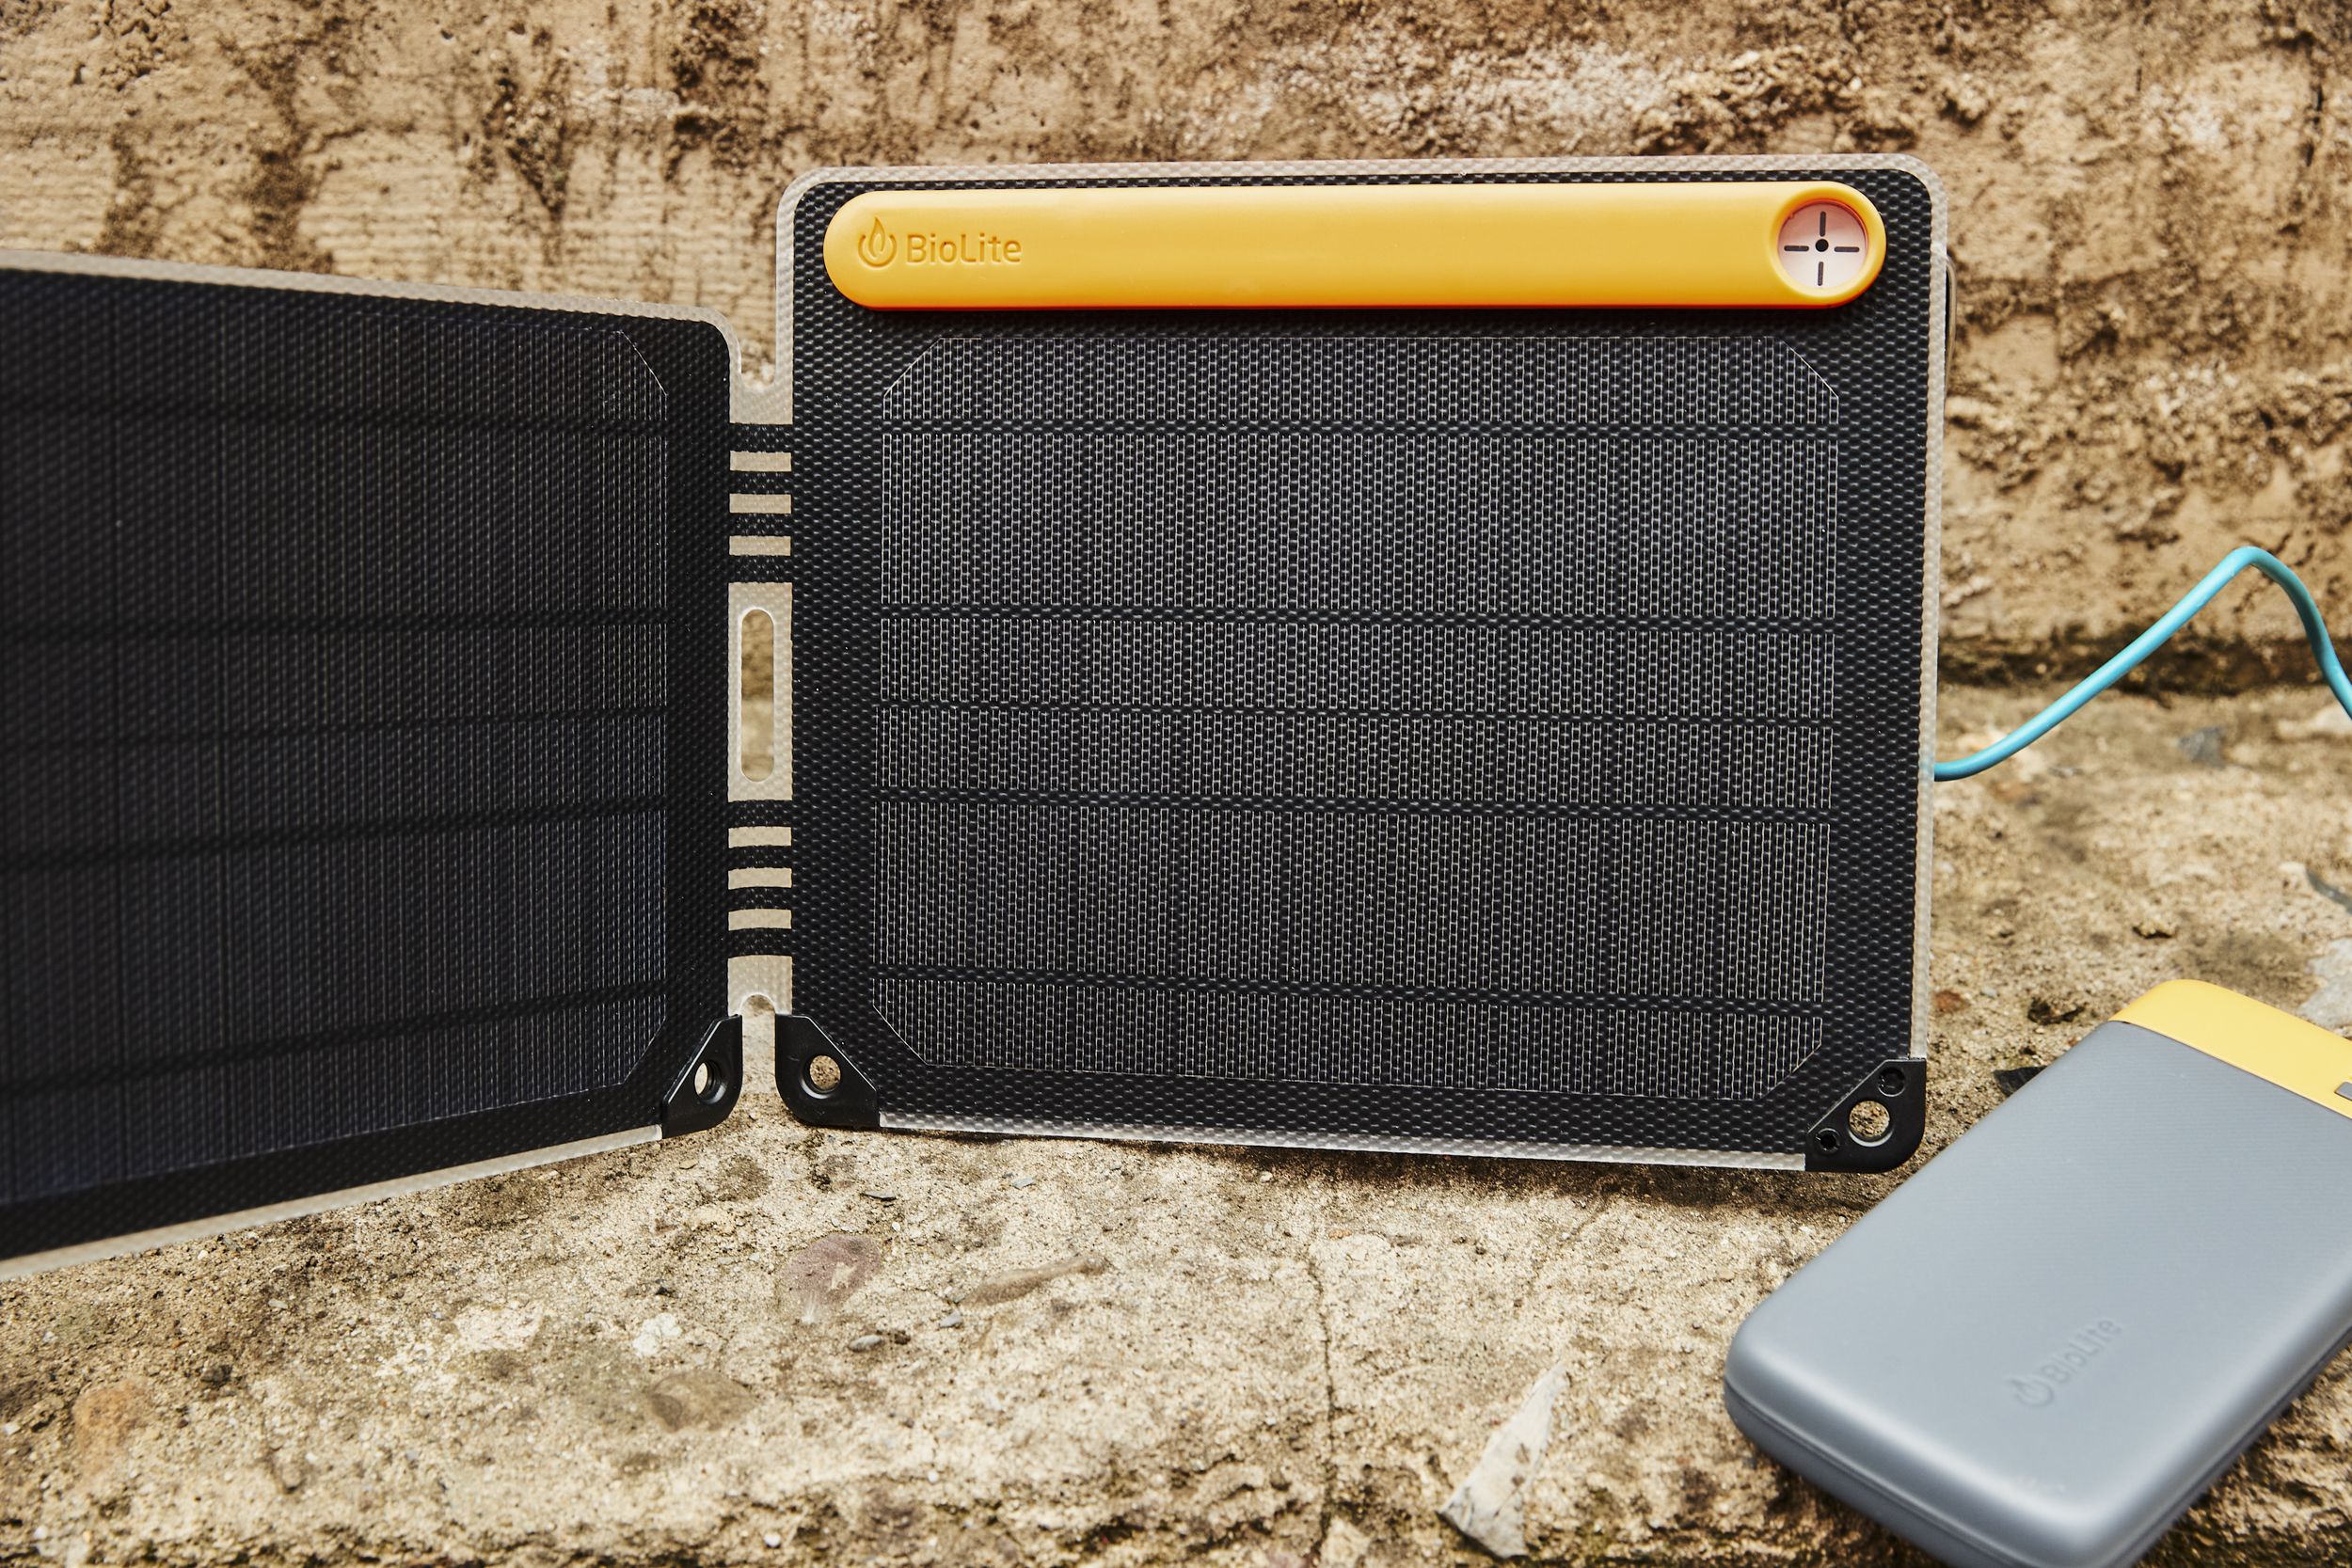 The Best Solar Chargers 2023 - Solar Chargers for Your Phone